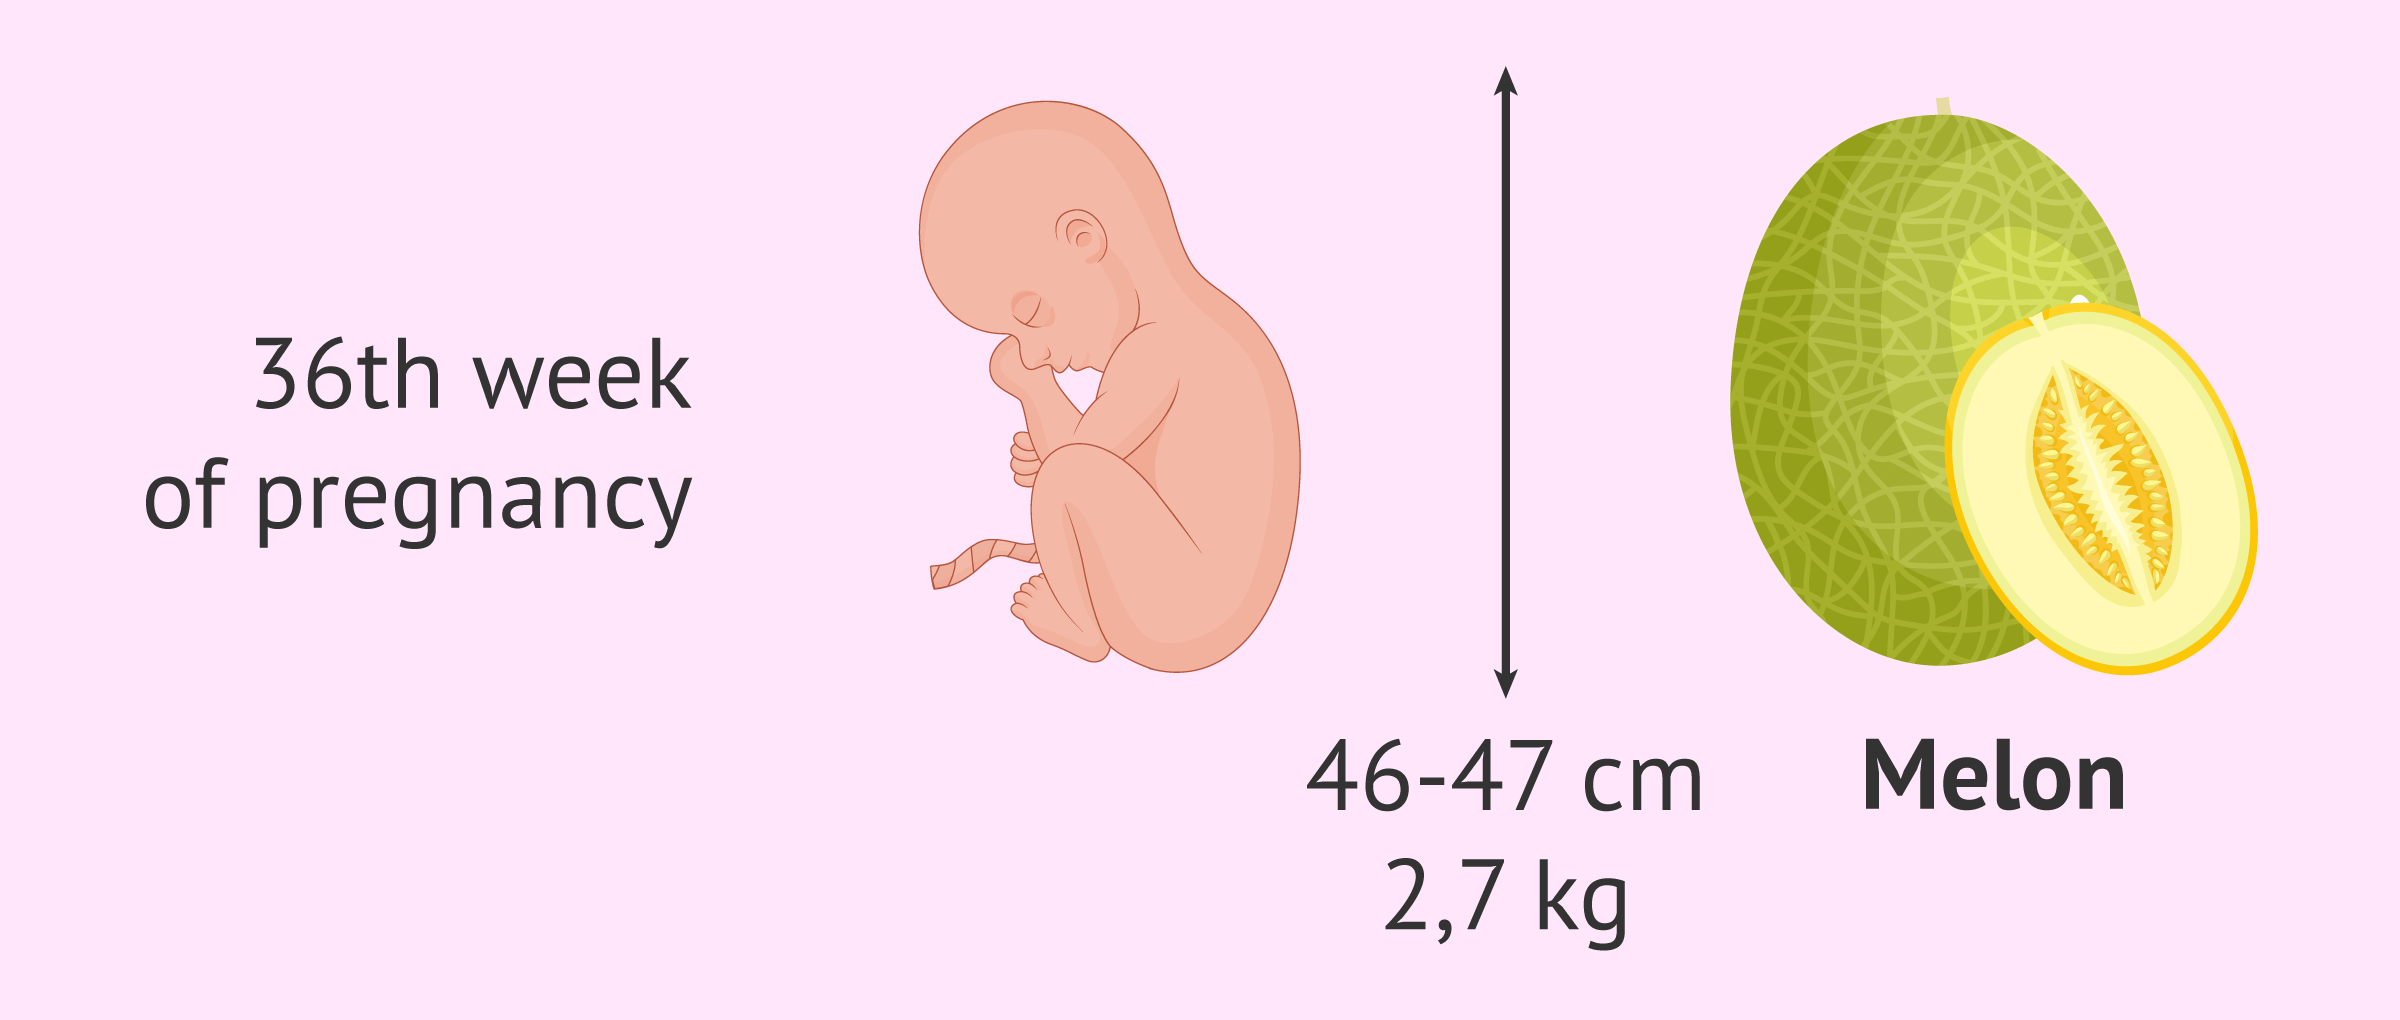 The size of the baby at 36 weeks of gestation